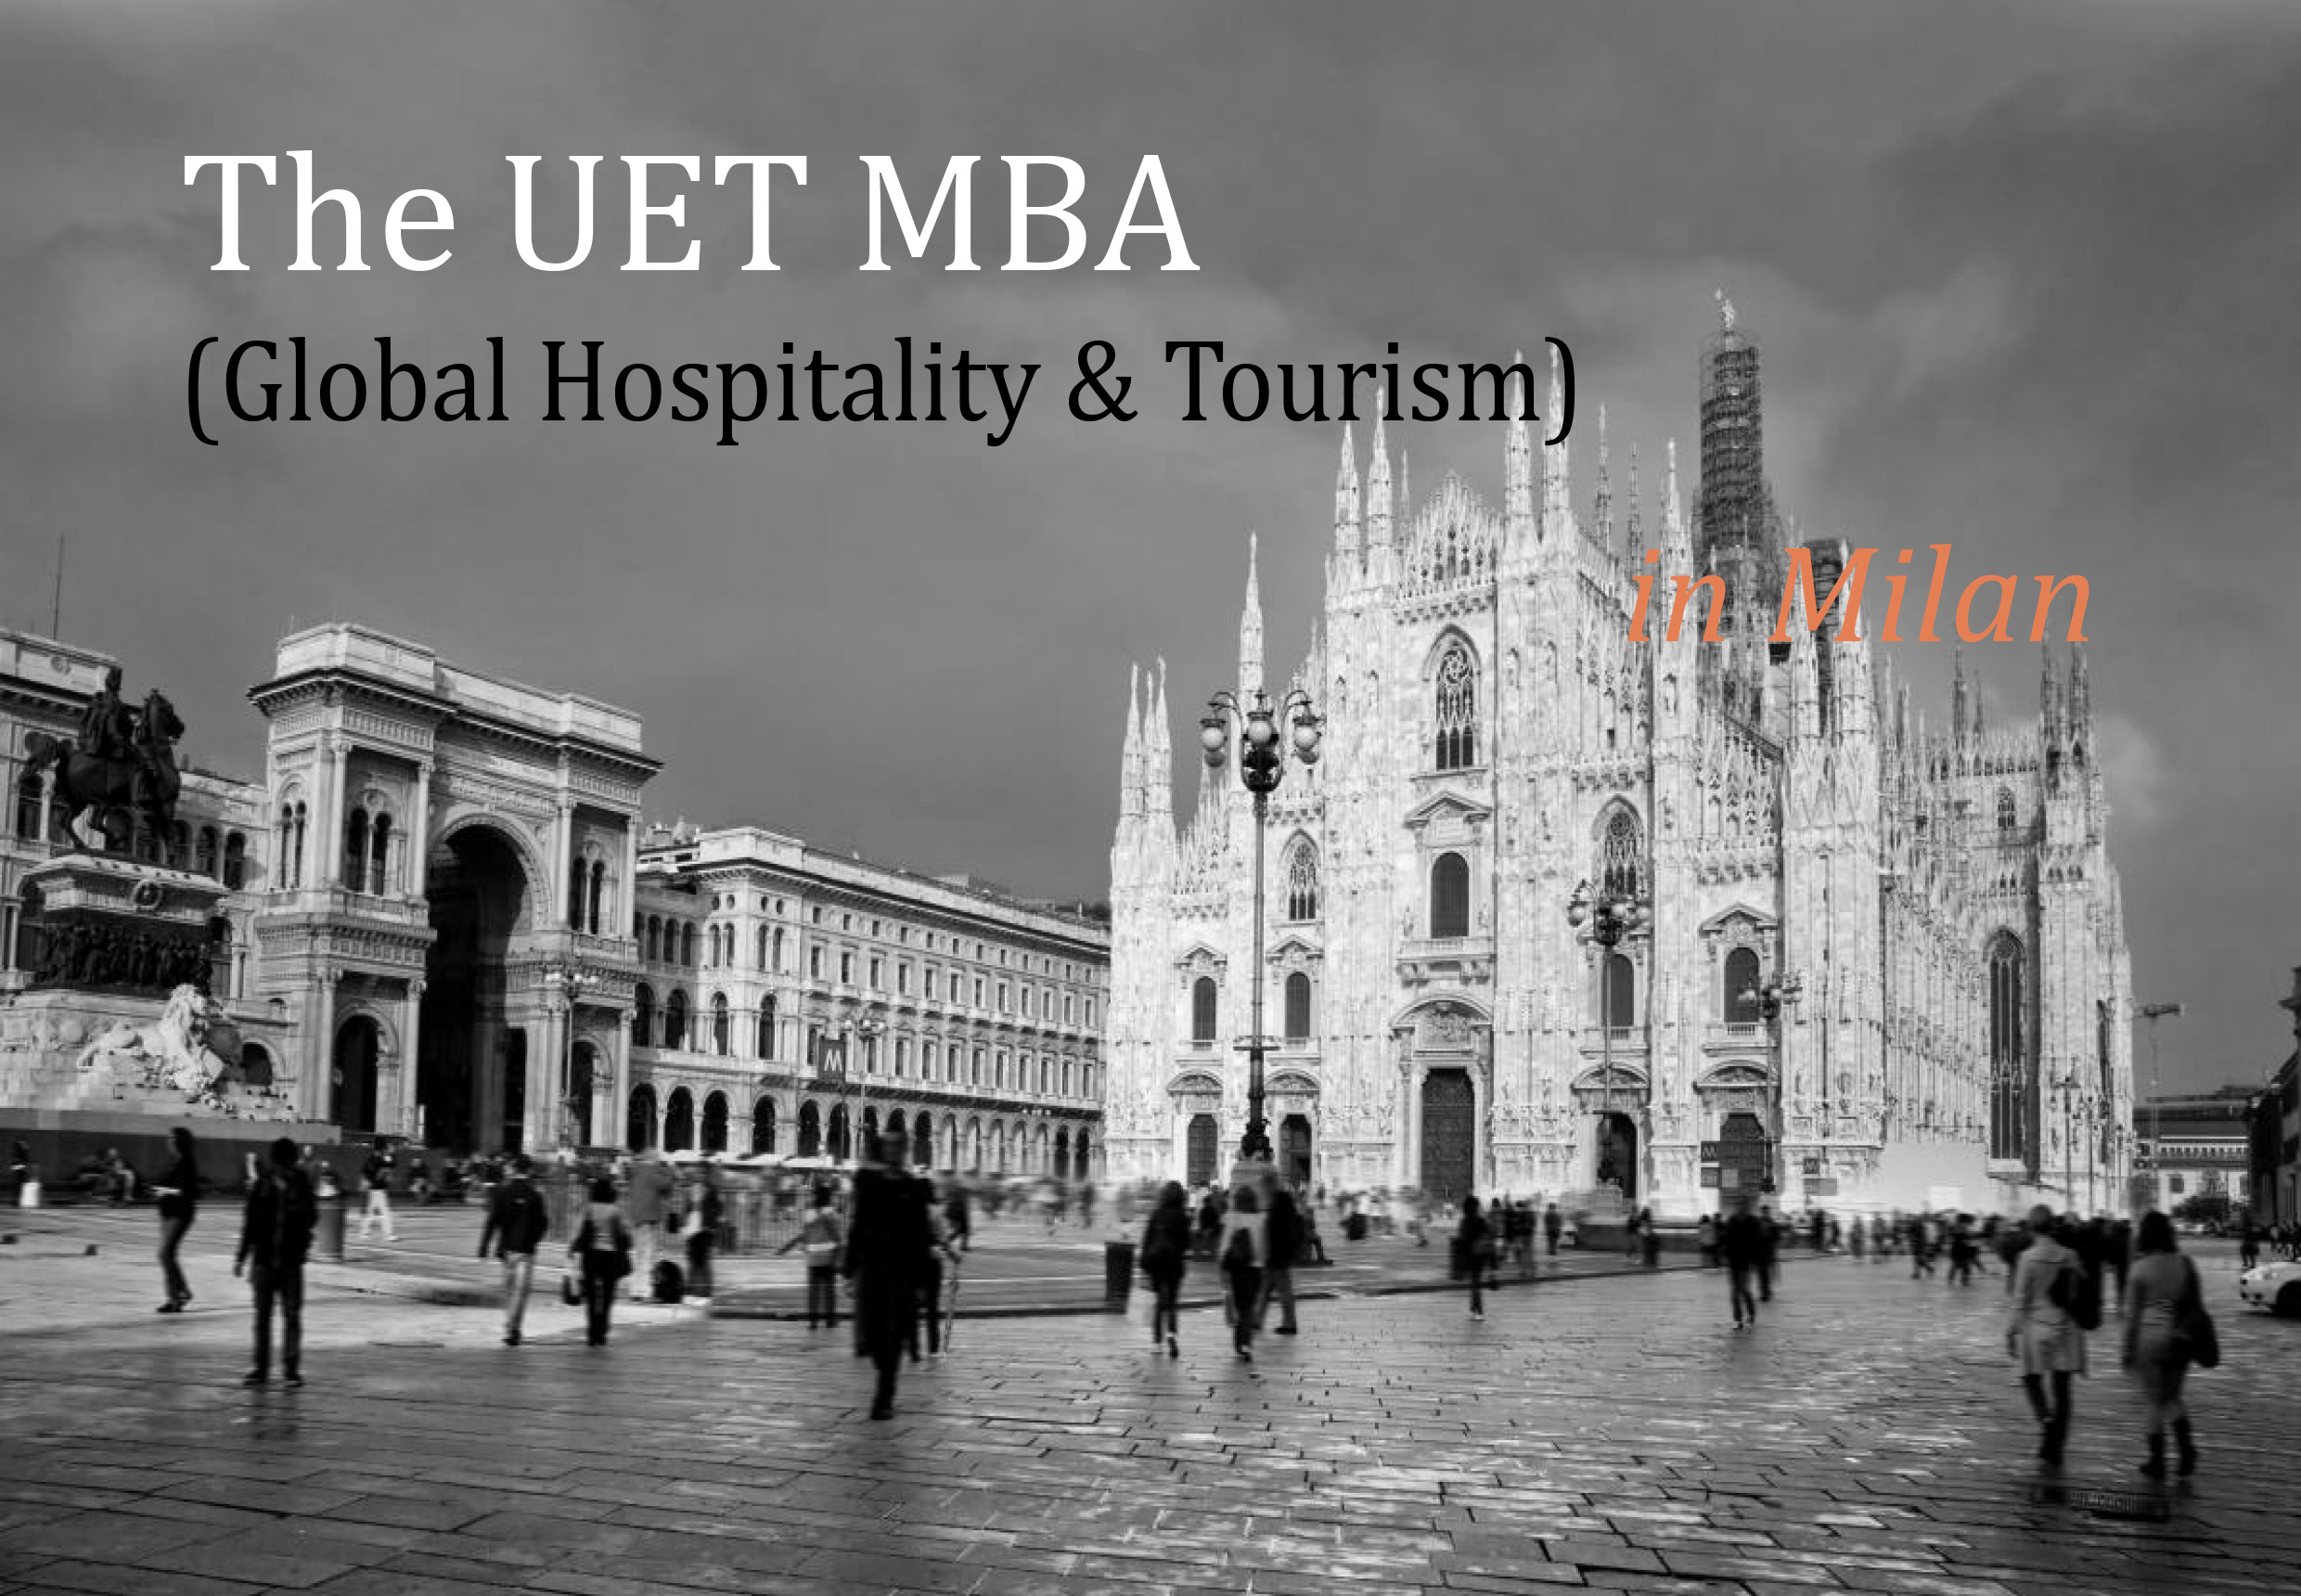 MBA (Master of Business Administration) Brochure 28.03.17 UET Milano